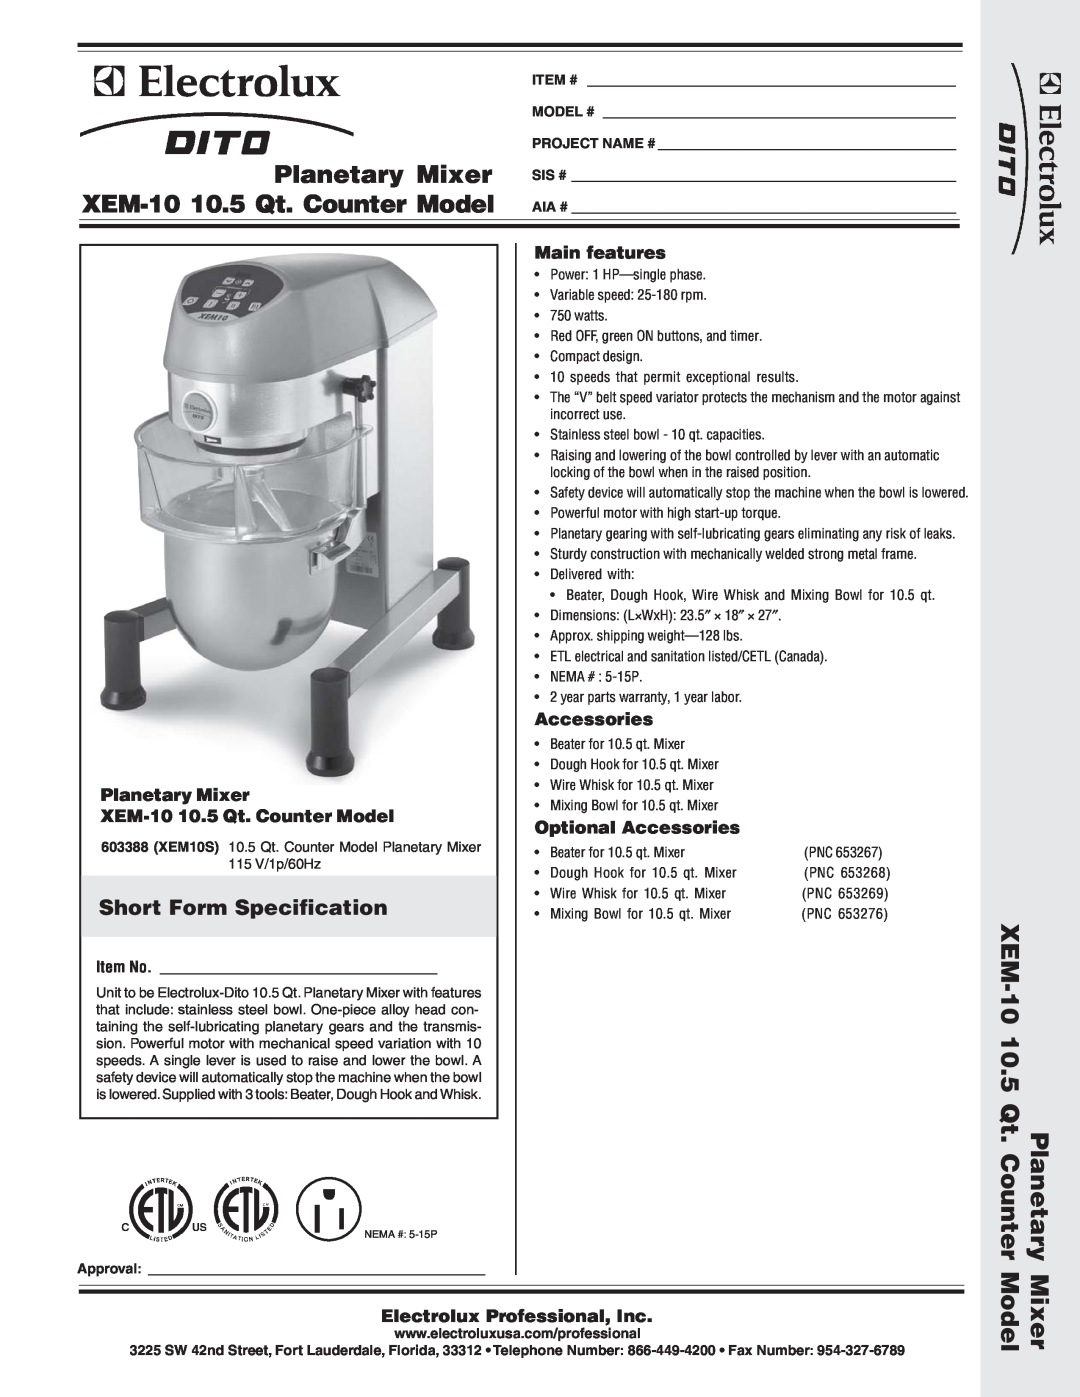 Electrolux 603388 dimensions Short Form Specification, Main features, Planetary Mixer, Optional Accessories, Item # 